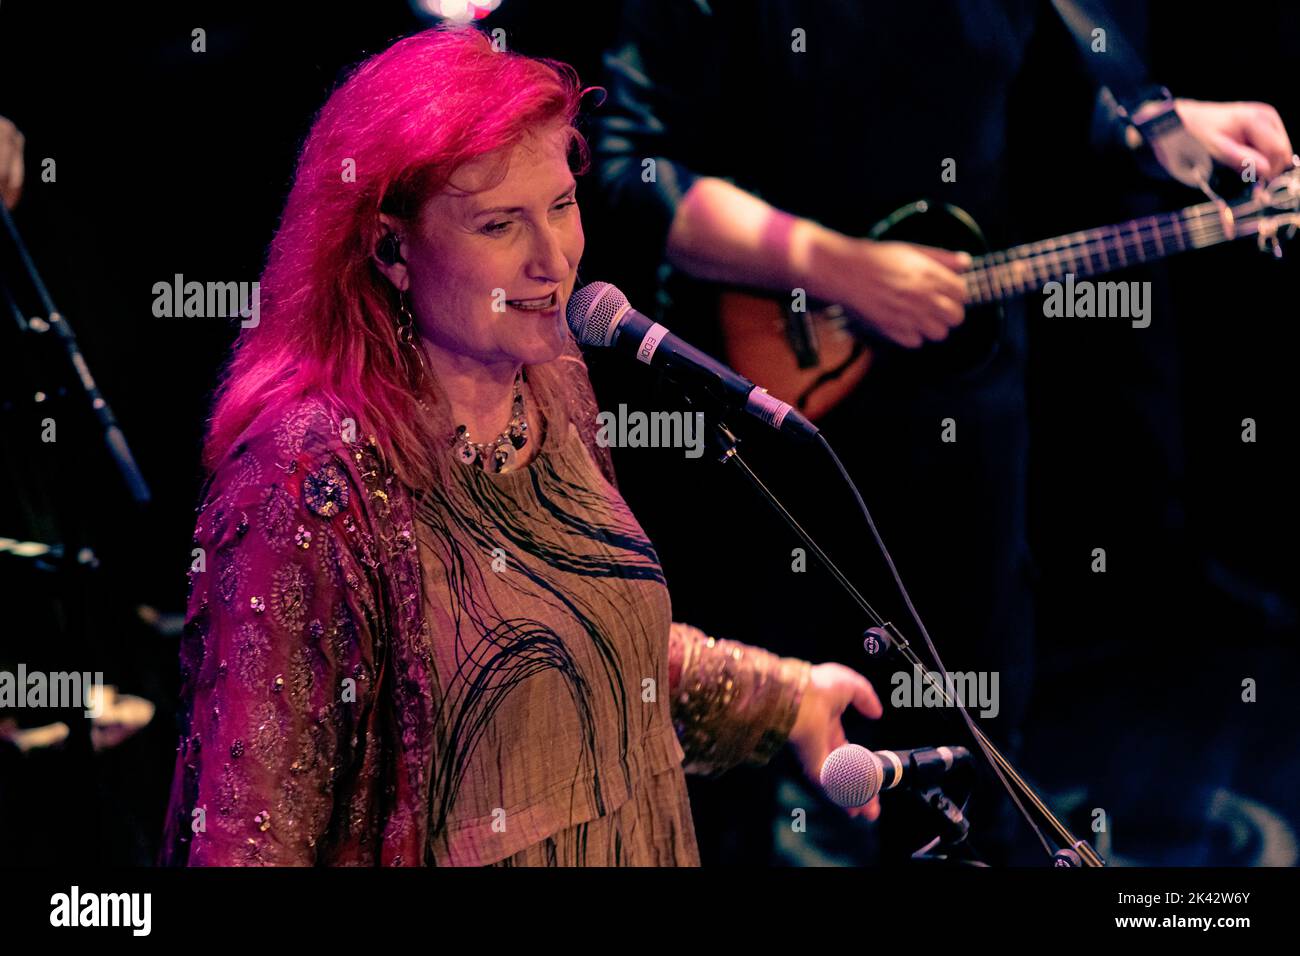 Eddi Reader at Sage Gateshead. 40th Anniversary Tour. Sadenia 'Eddi' Reader MBE is a Scottish singer-songwriter, known for her work as frontwoman of Fairground Attraction and for an enduring solo career. She is the recipient of three BRIT Awards. In 2003, she showcased the works of Scotland's national poet, Robert Burns. United Kingdom. Stock Photo